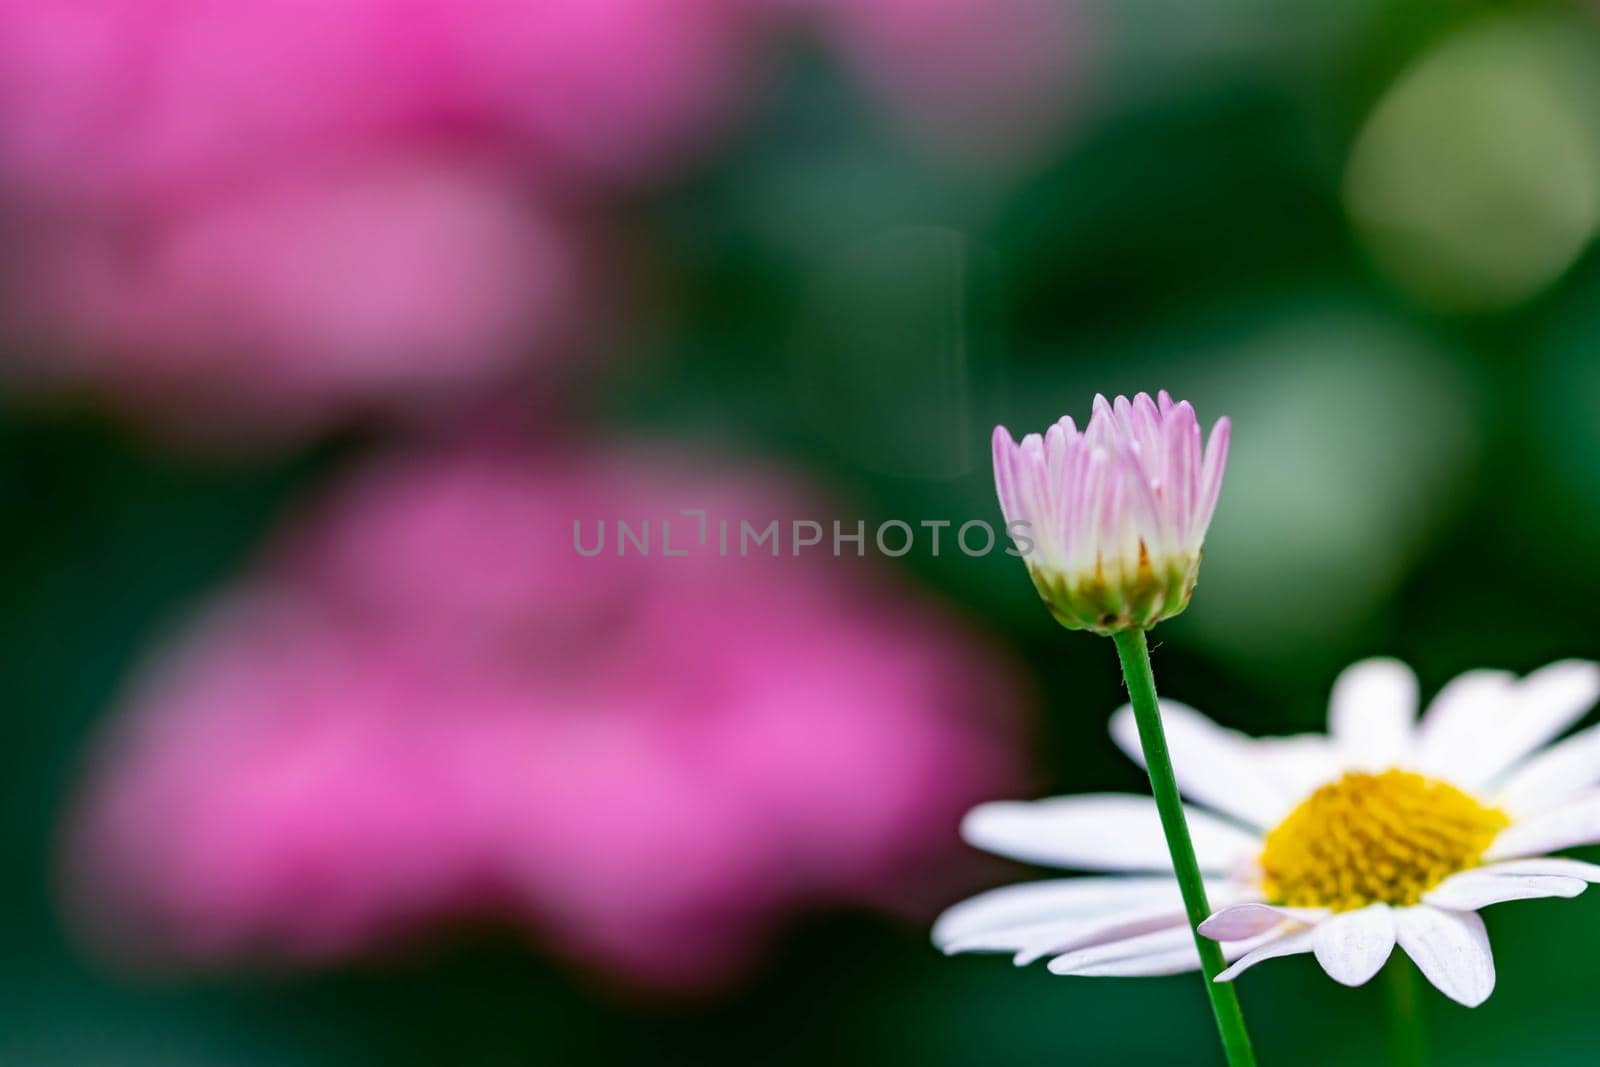 horizontal full lenght blurry shot of white and pink flowers with soft green blurry background image with some space for text